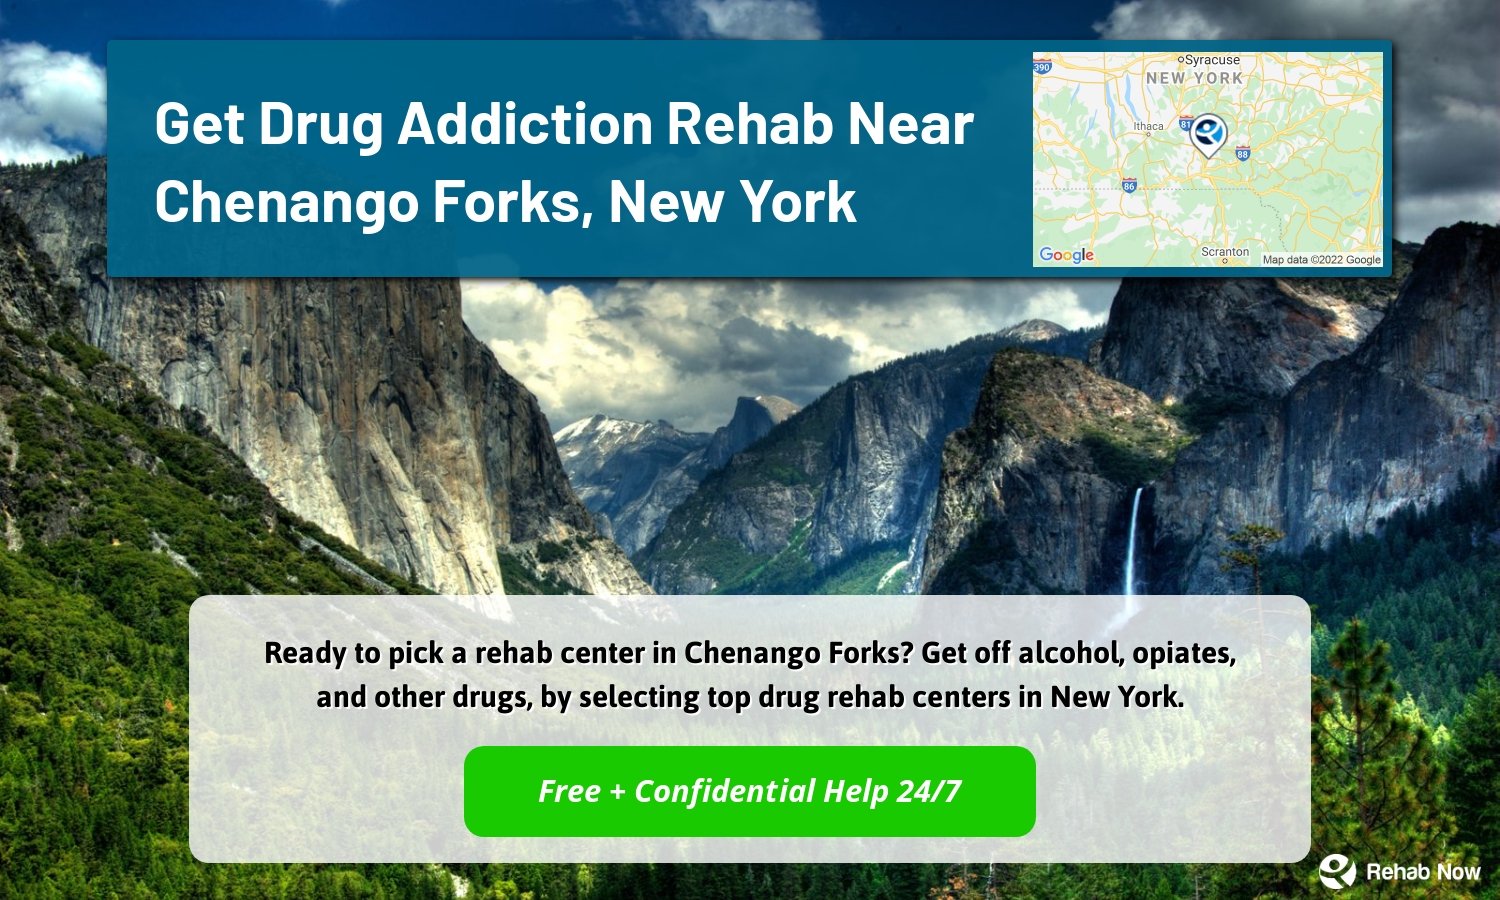 Ready to pick a rehab center in Chenango Forks? Get off alcohol, opiates, and other drugs, by selecting top drug rehab centers in New York.